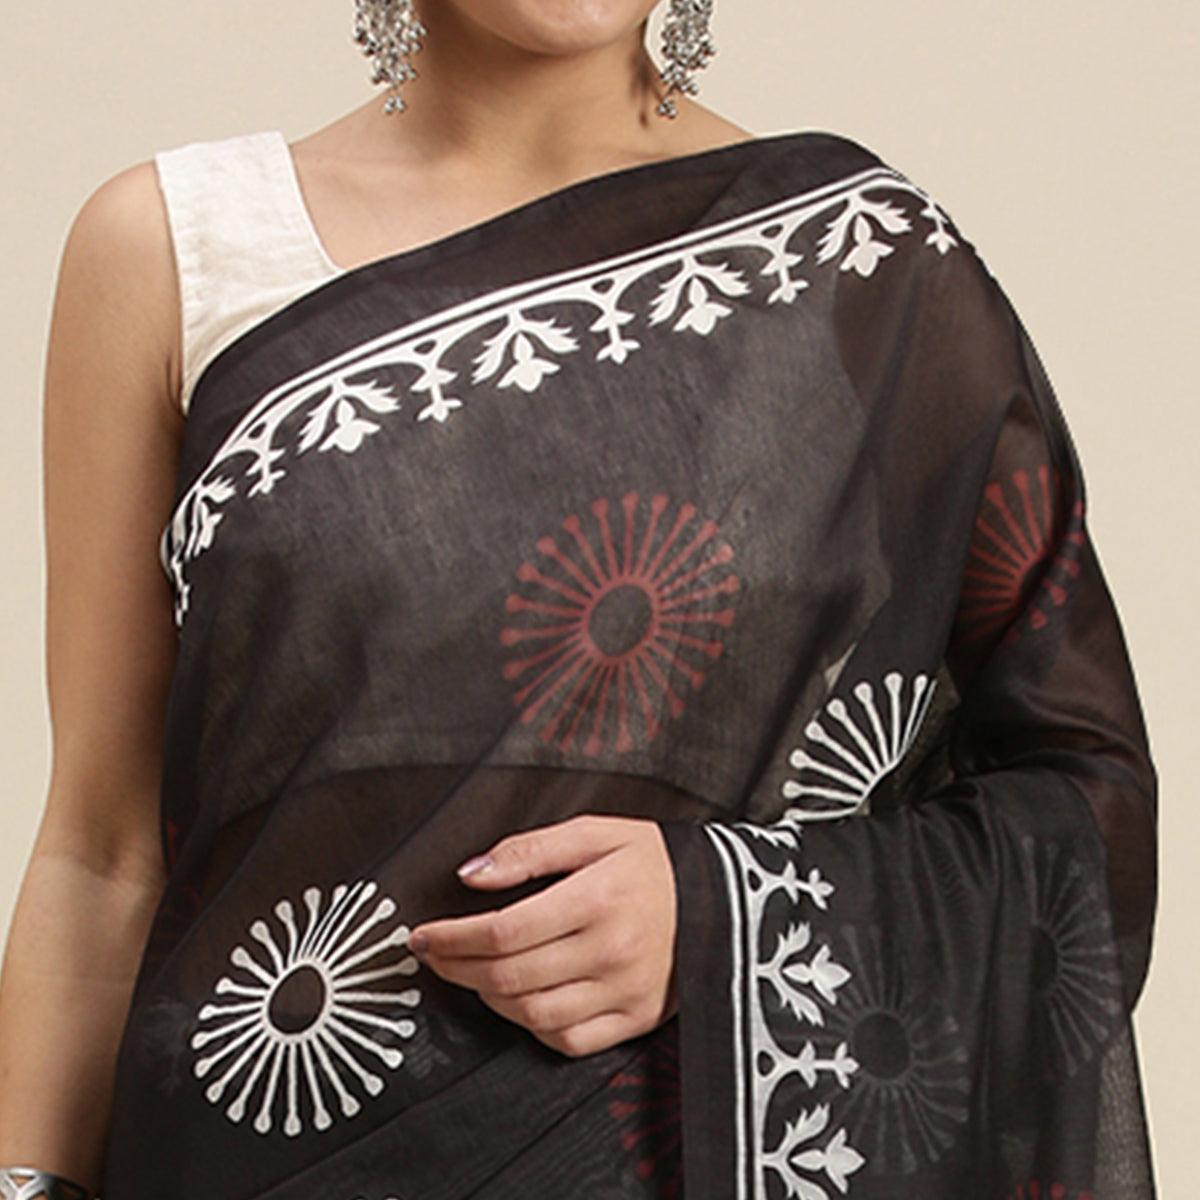 Black Casual Wear Printed Cotton Blend Saree With Tassels - Peachmode